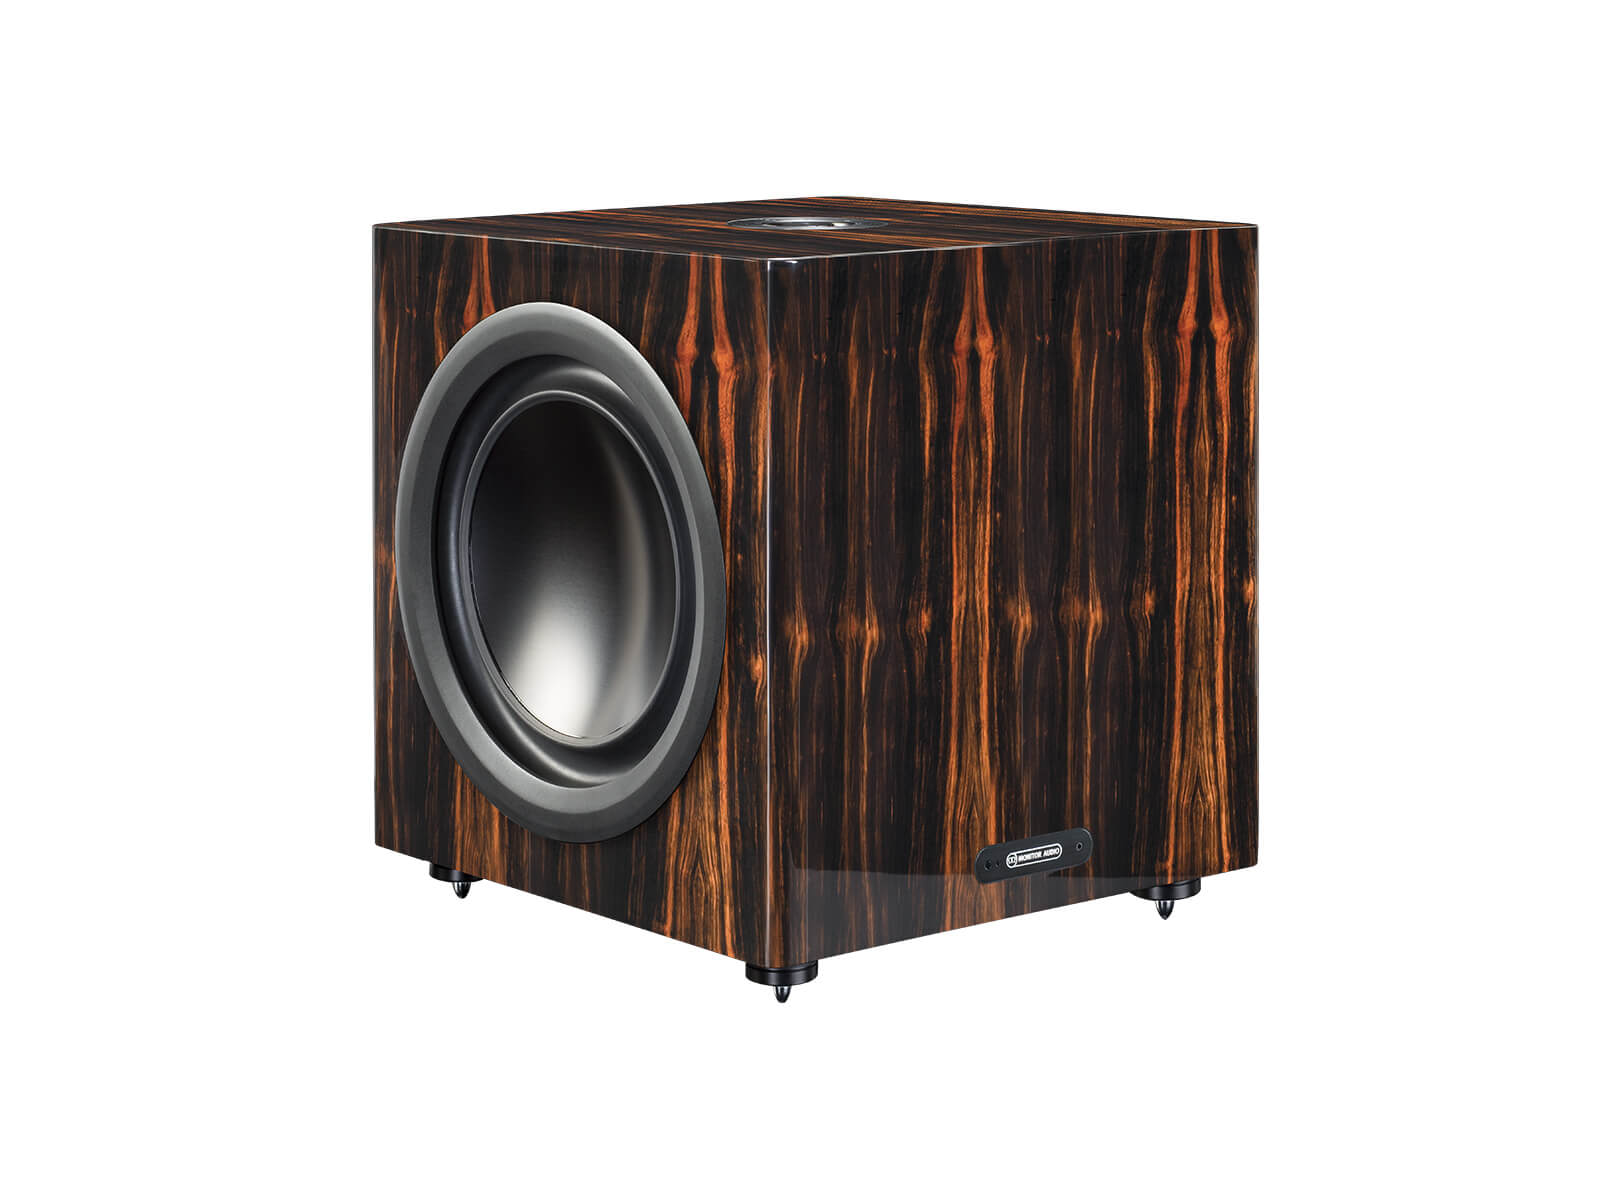 Platinum PLW215 II, subwoofer, with a santos rosewood real wood veneer finish.